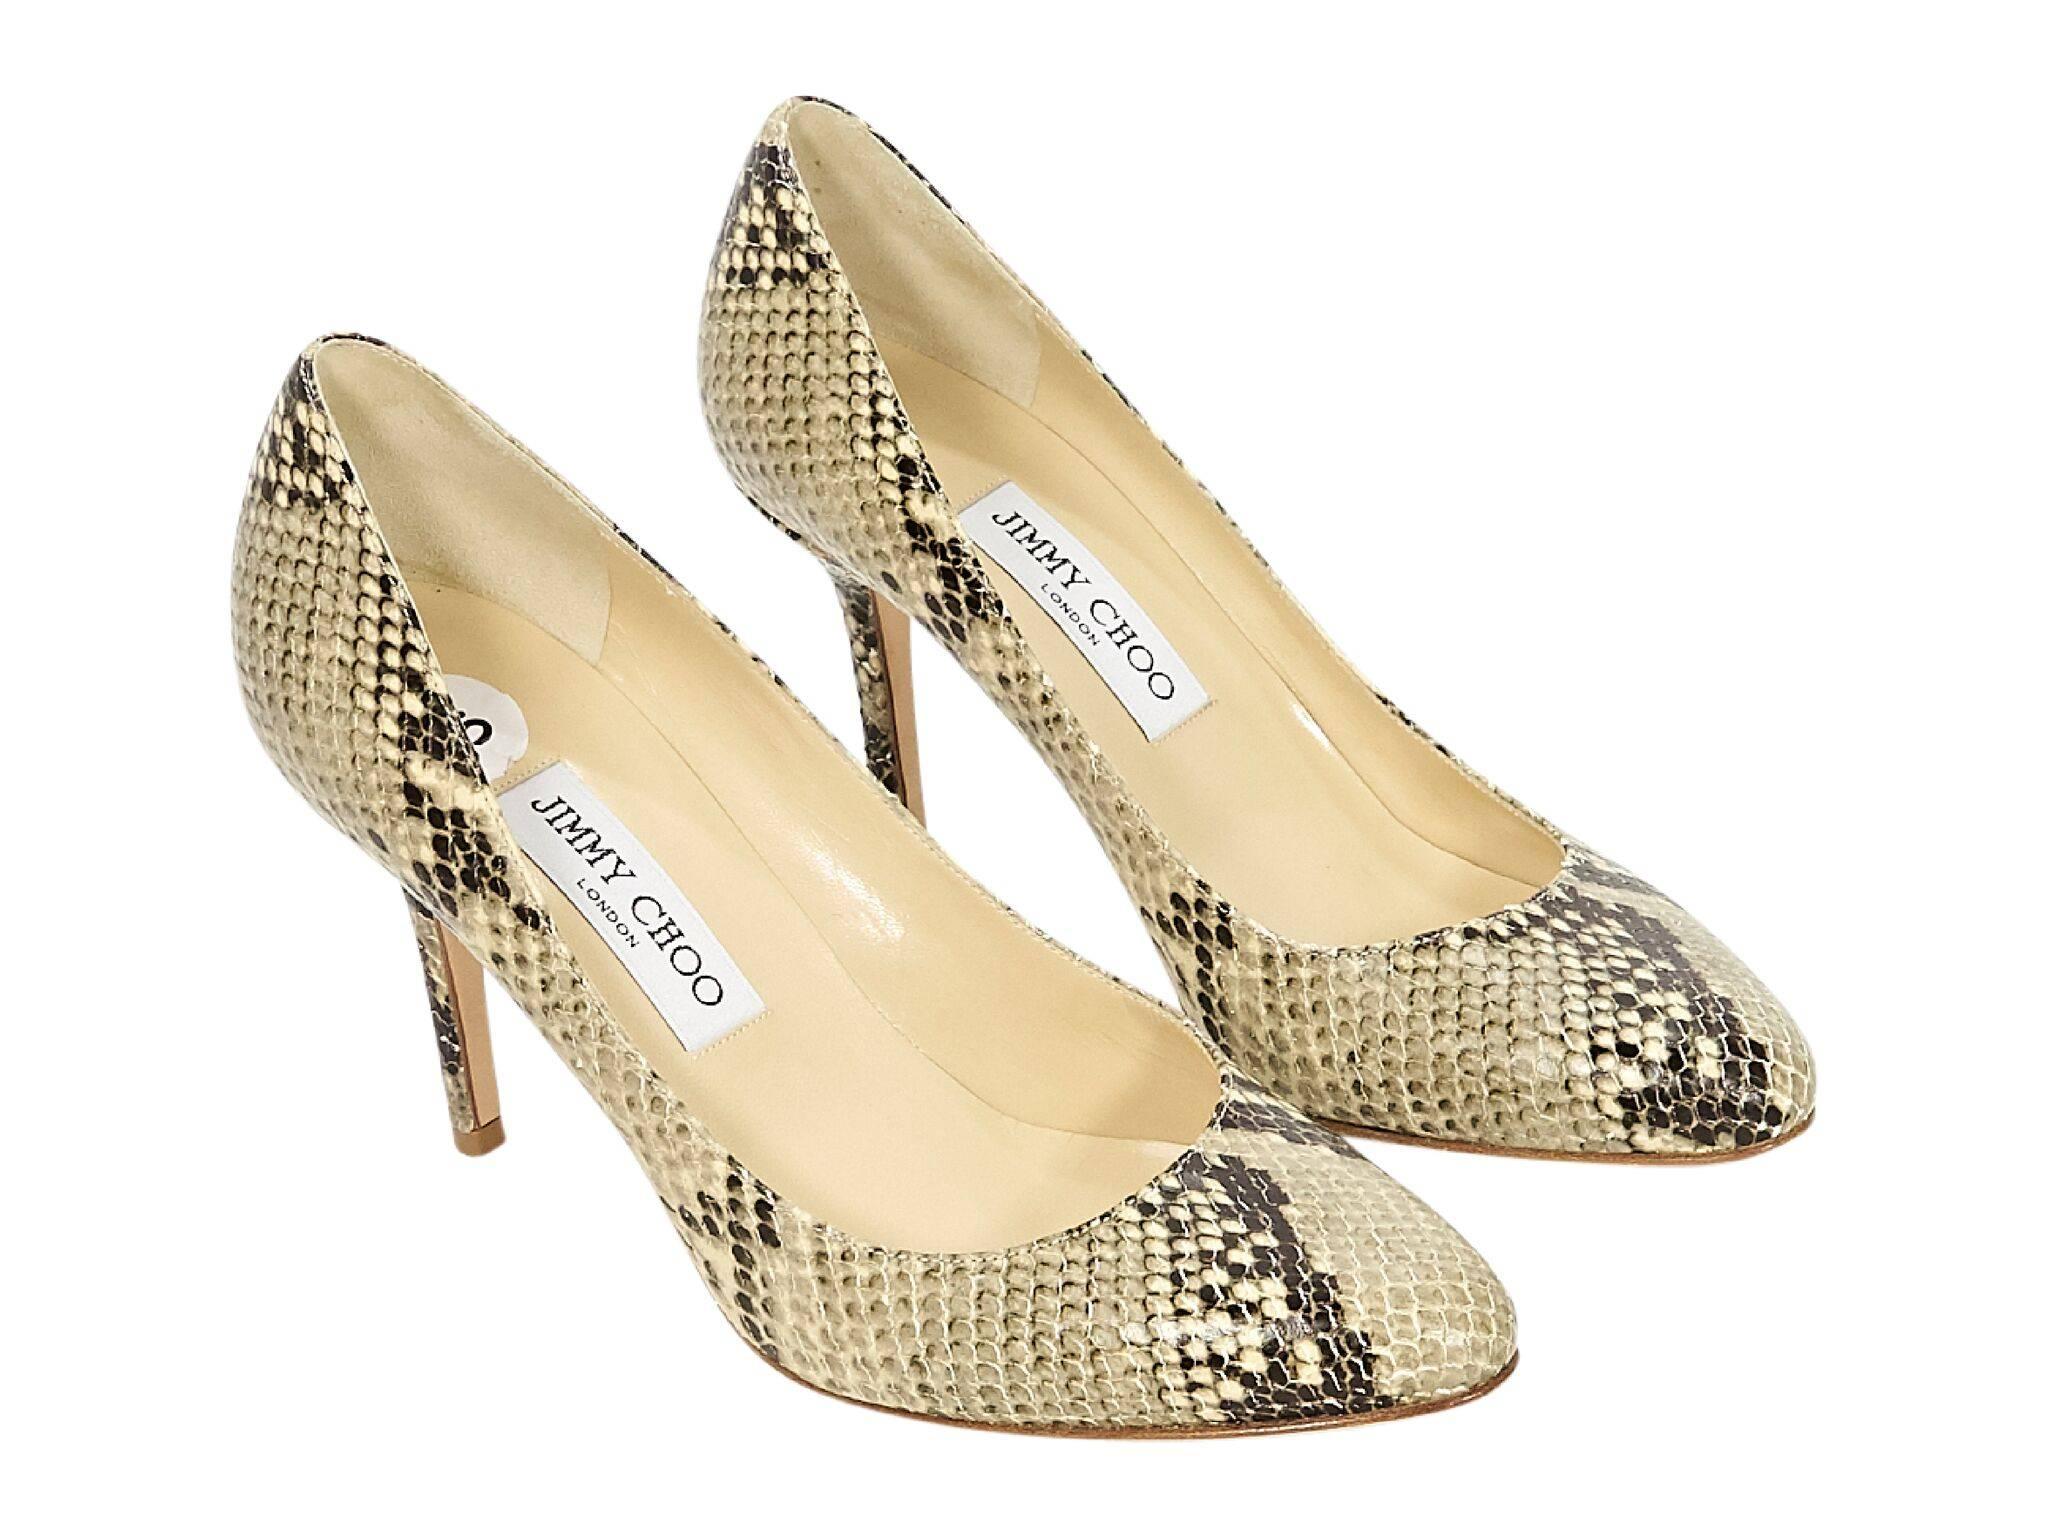 Product details:  Exotic tan snakeskin pumps by Jimmy Choo. Round toe.  Slip-on style. 
Condition: Pre-owned. Very good. 
Est. Retail $695